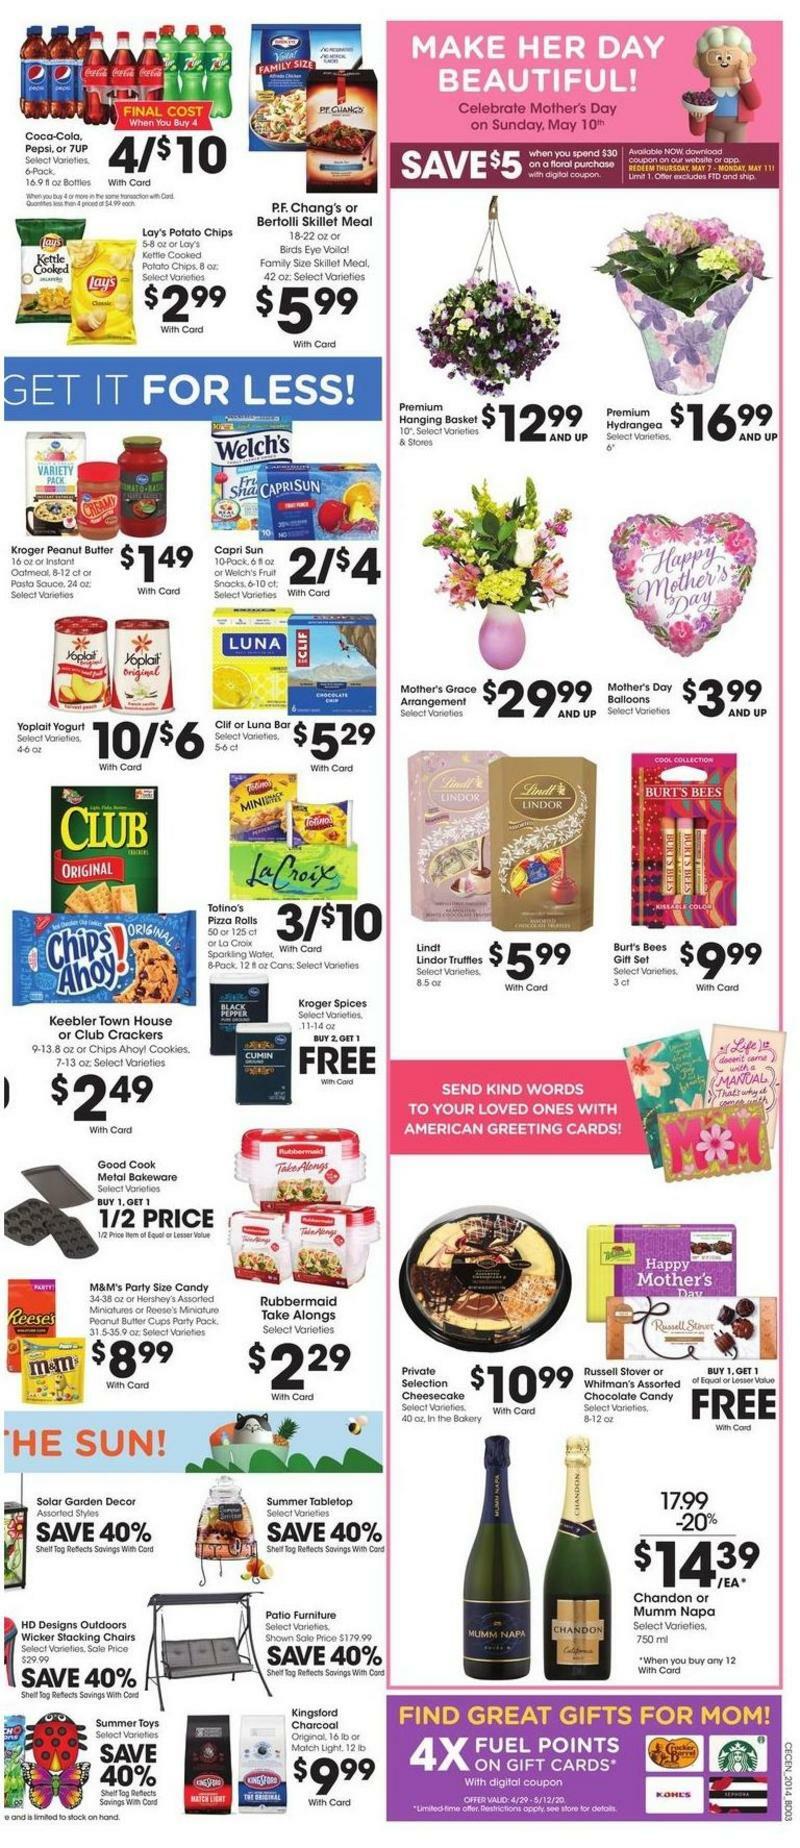 Kroger Weekly Ad from May 6